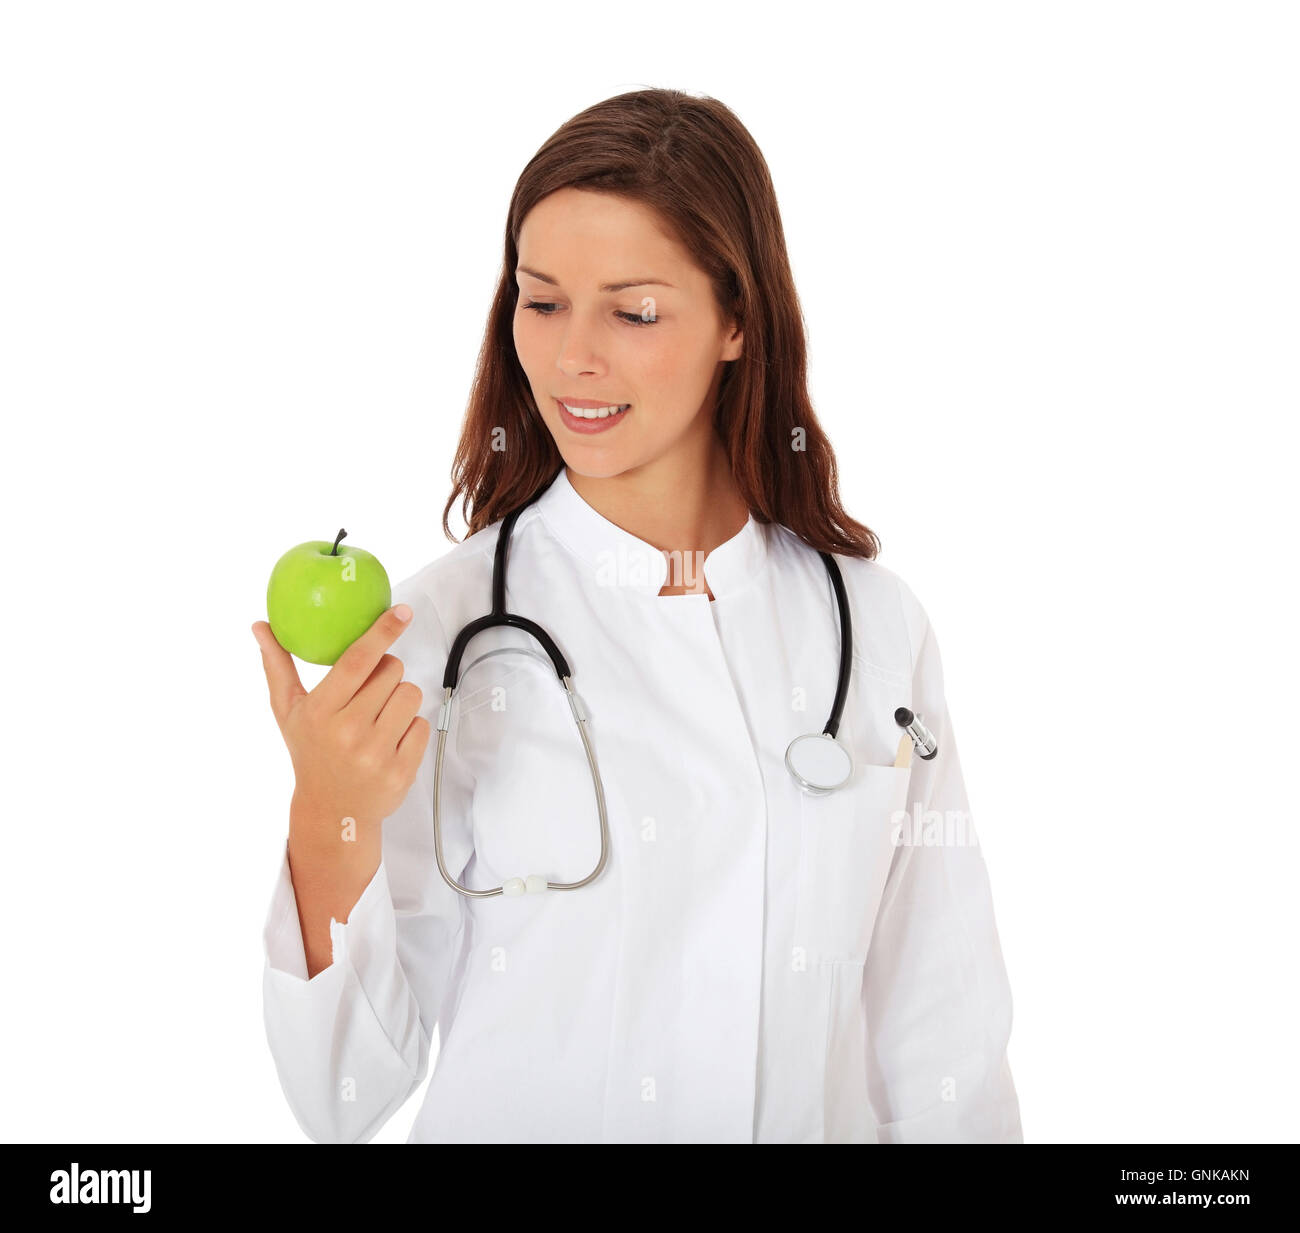 Attractive young doctor Stock Photo